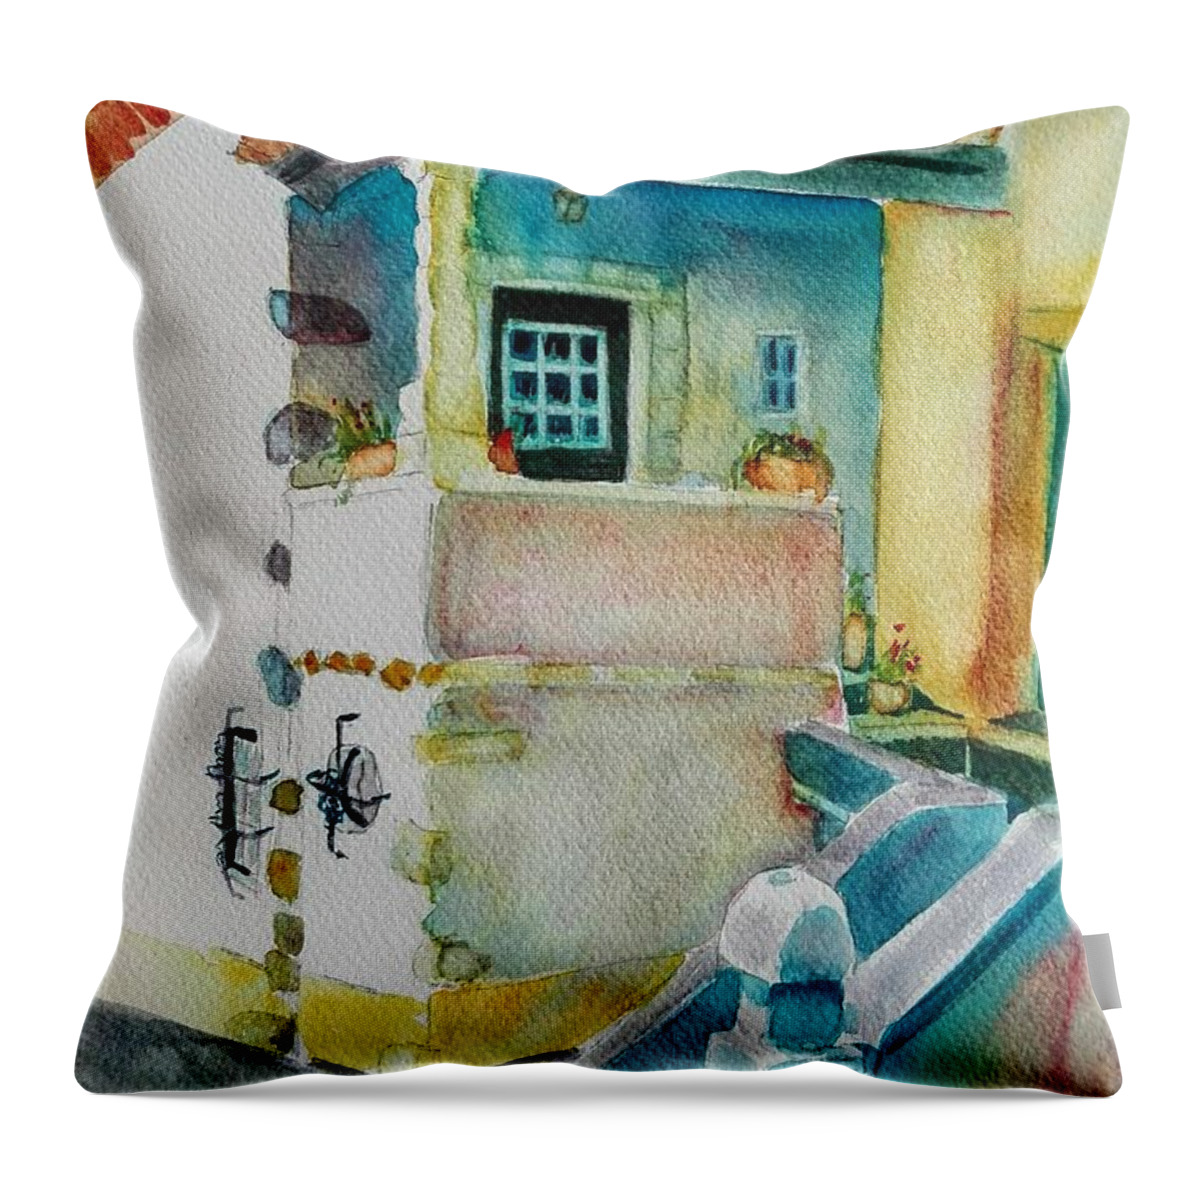 Obidos Throw Pillow featuring the painting House Obidos by Sandie Croft